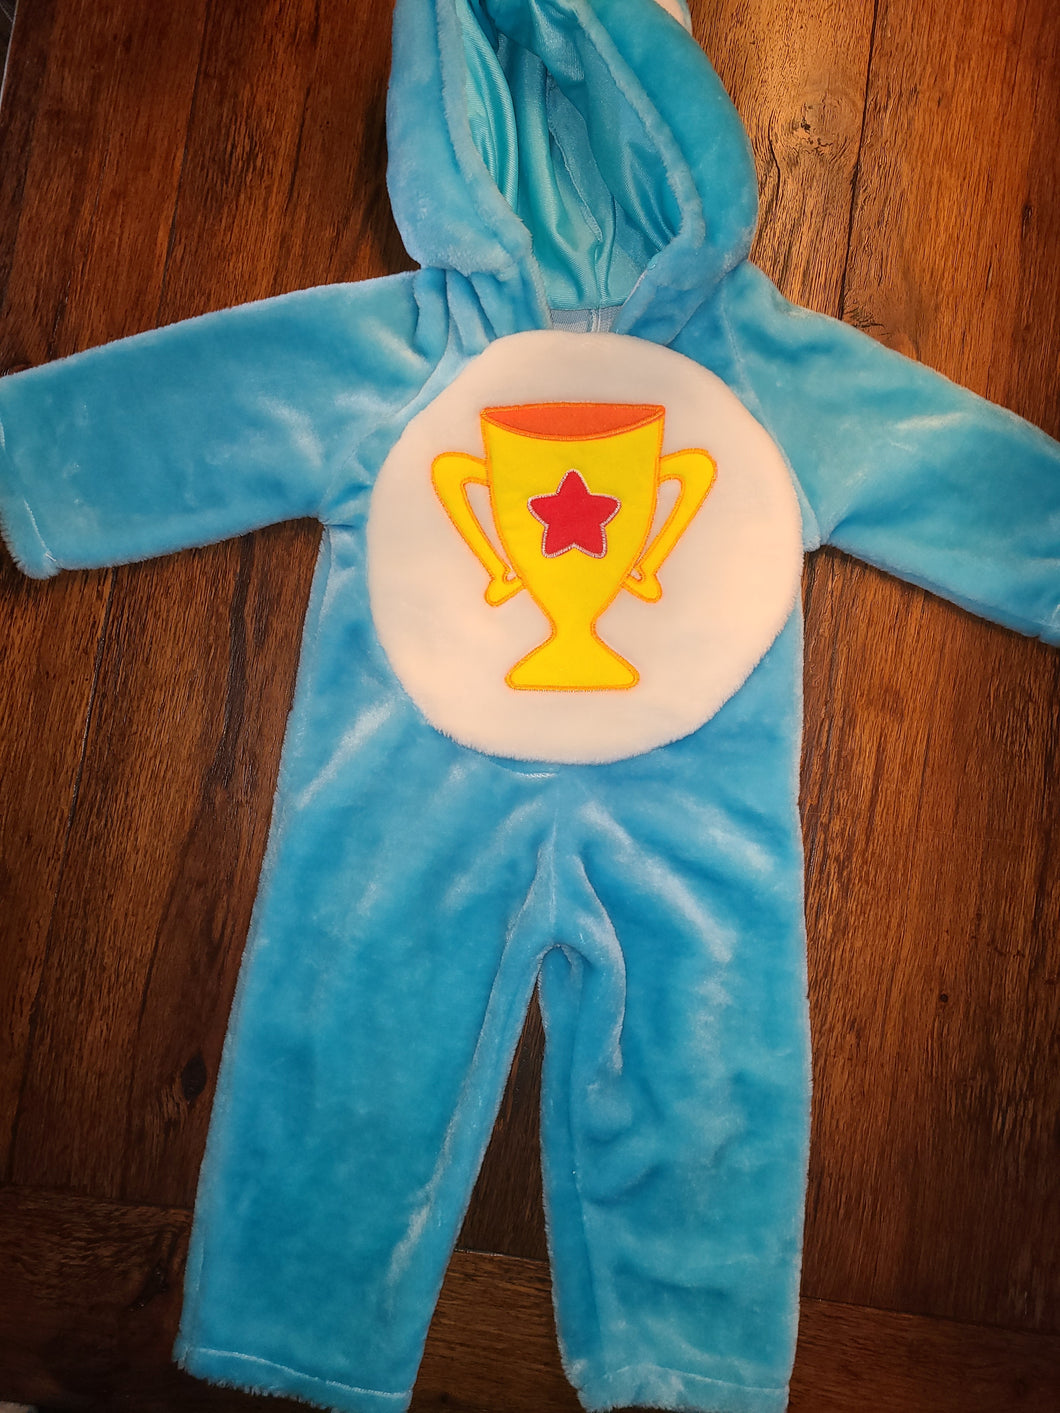 CARE BEAR COSTUME SIZE TODDLER